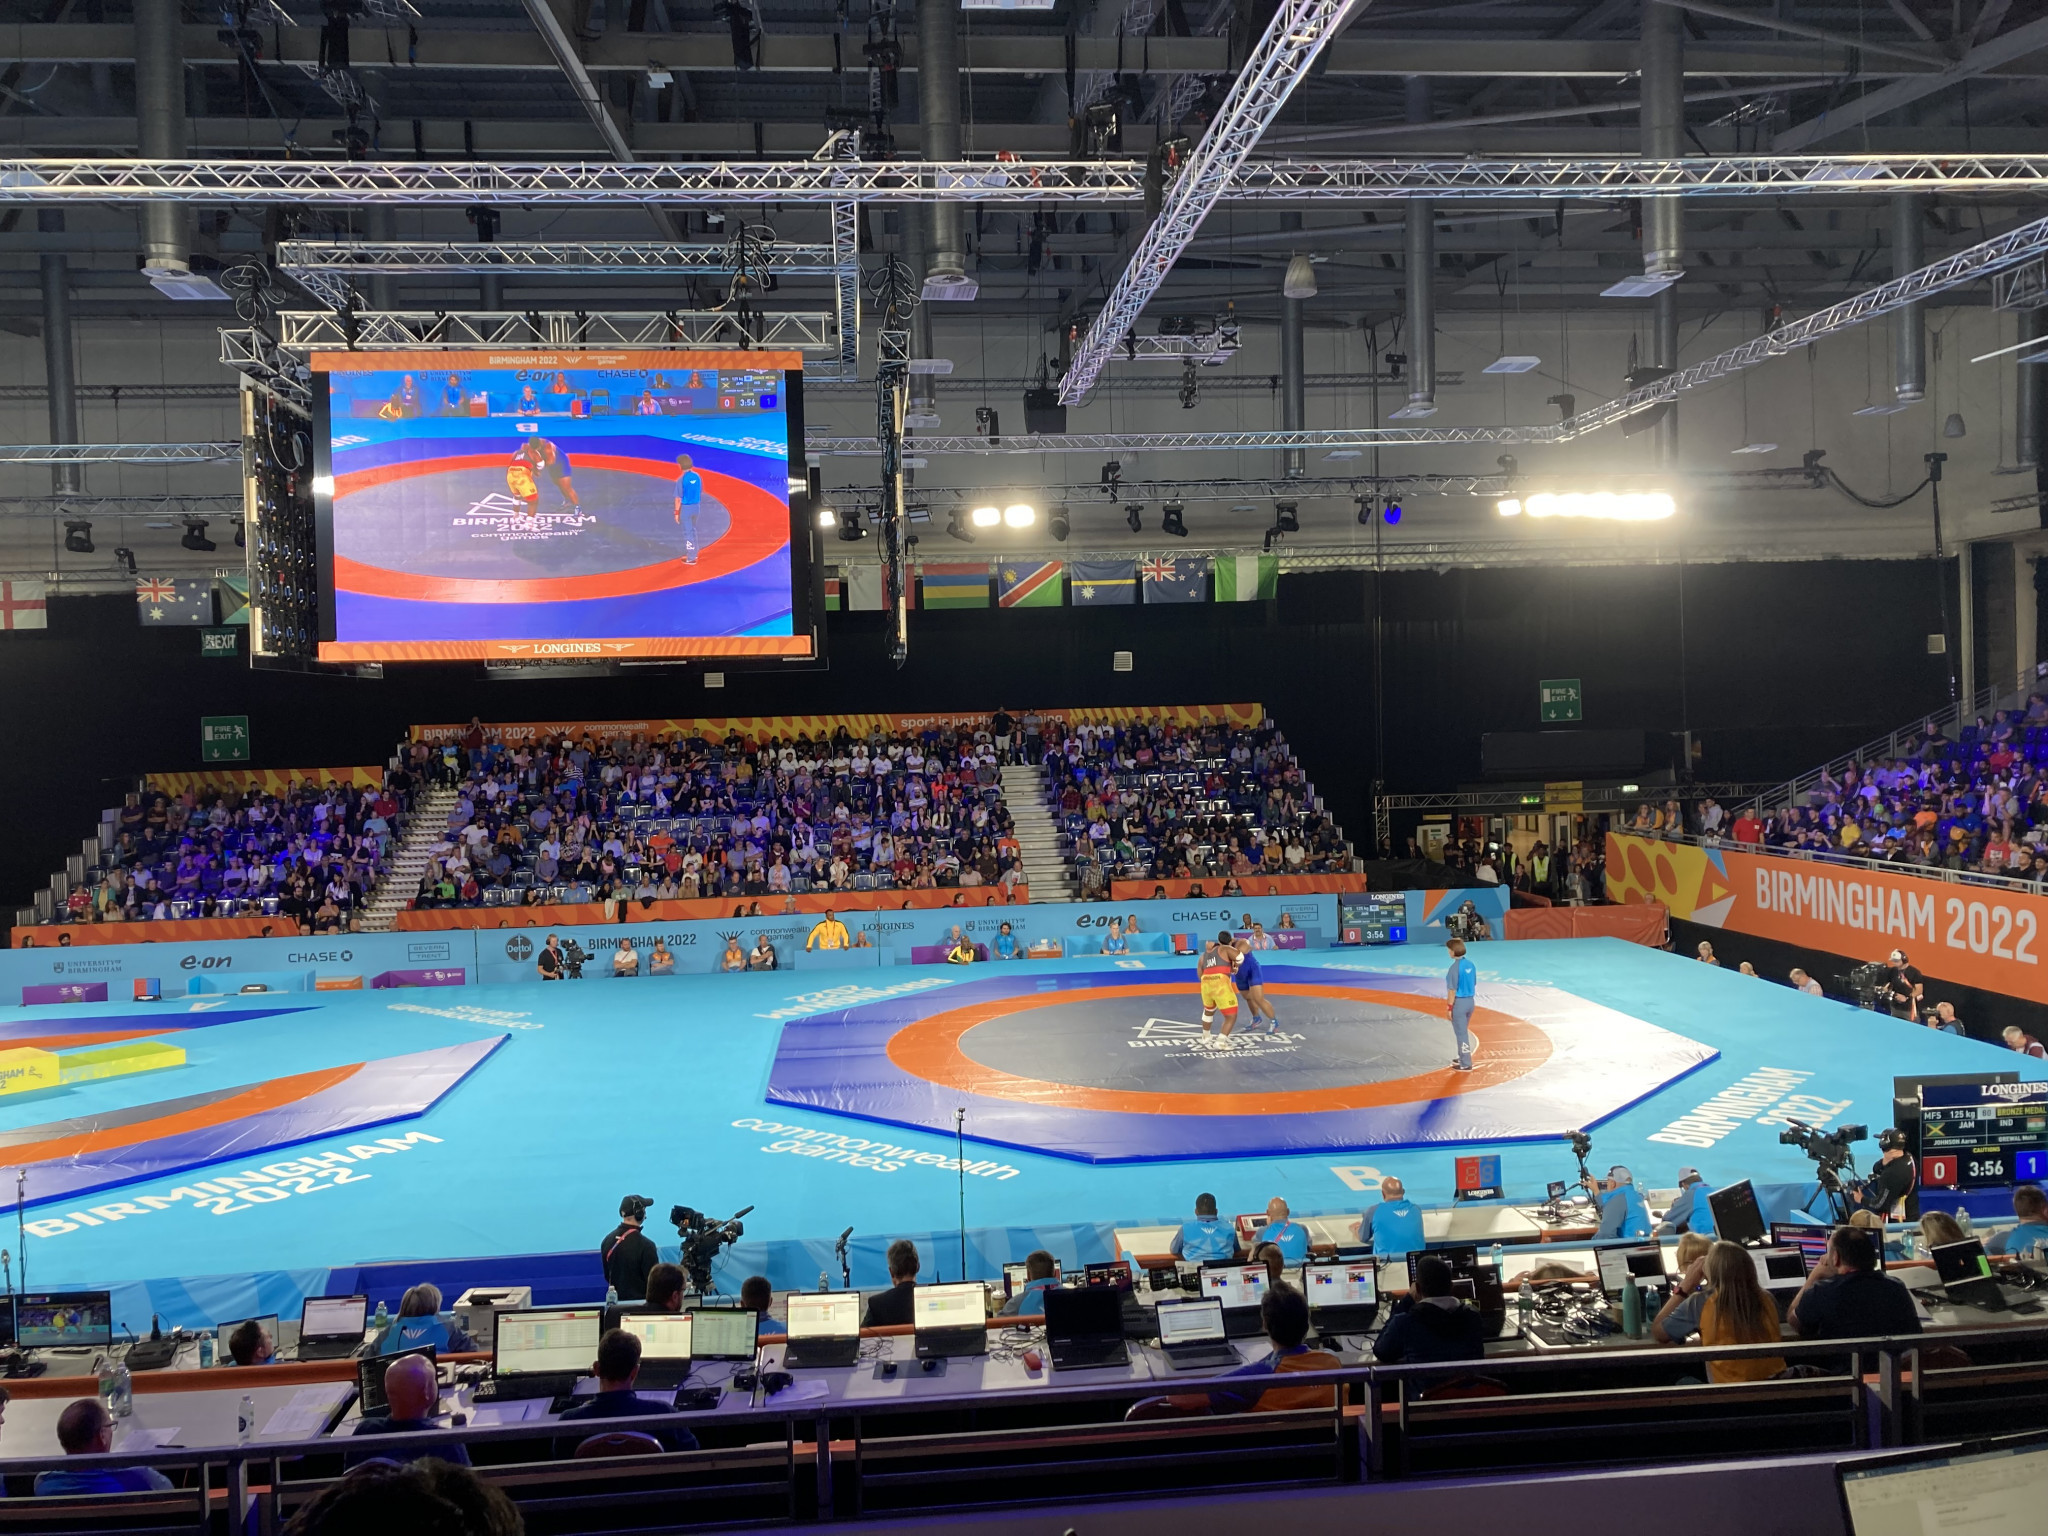 Spectators were told to vacate the wrestling venue while officials carried out safety checks ©ITG